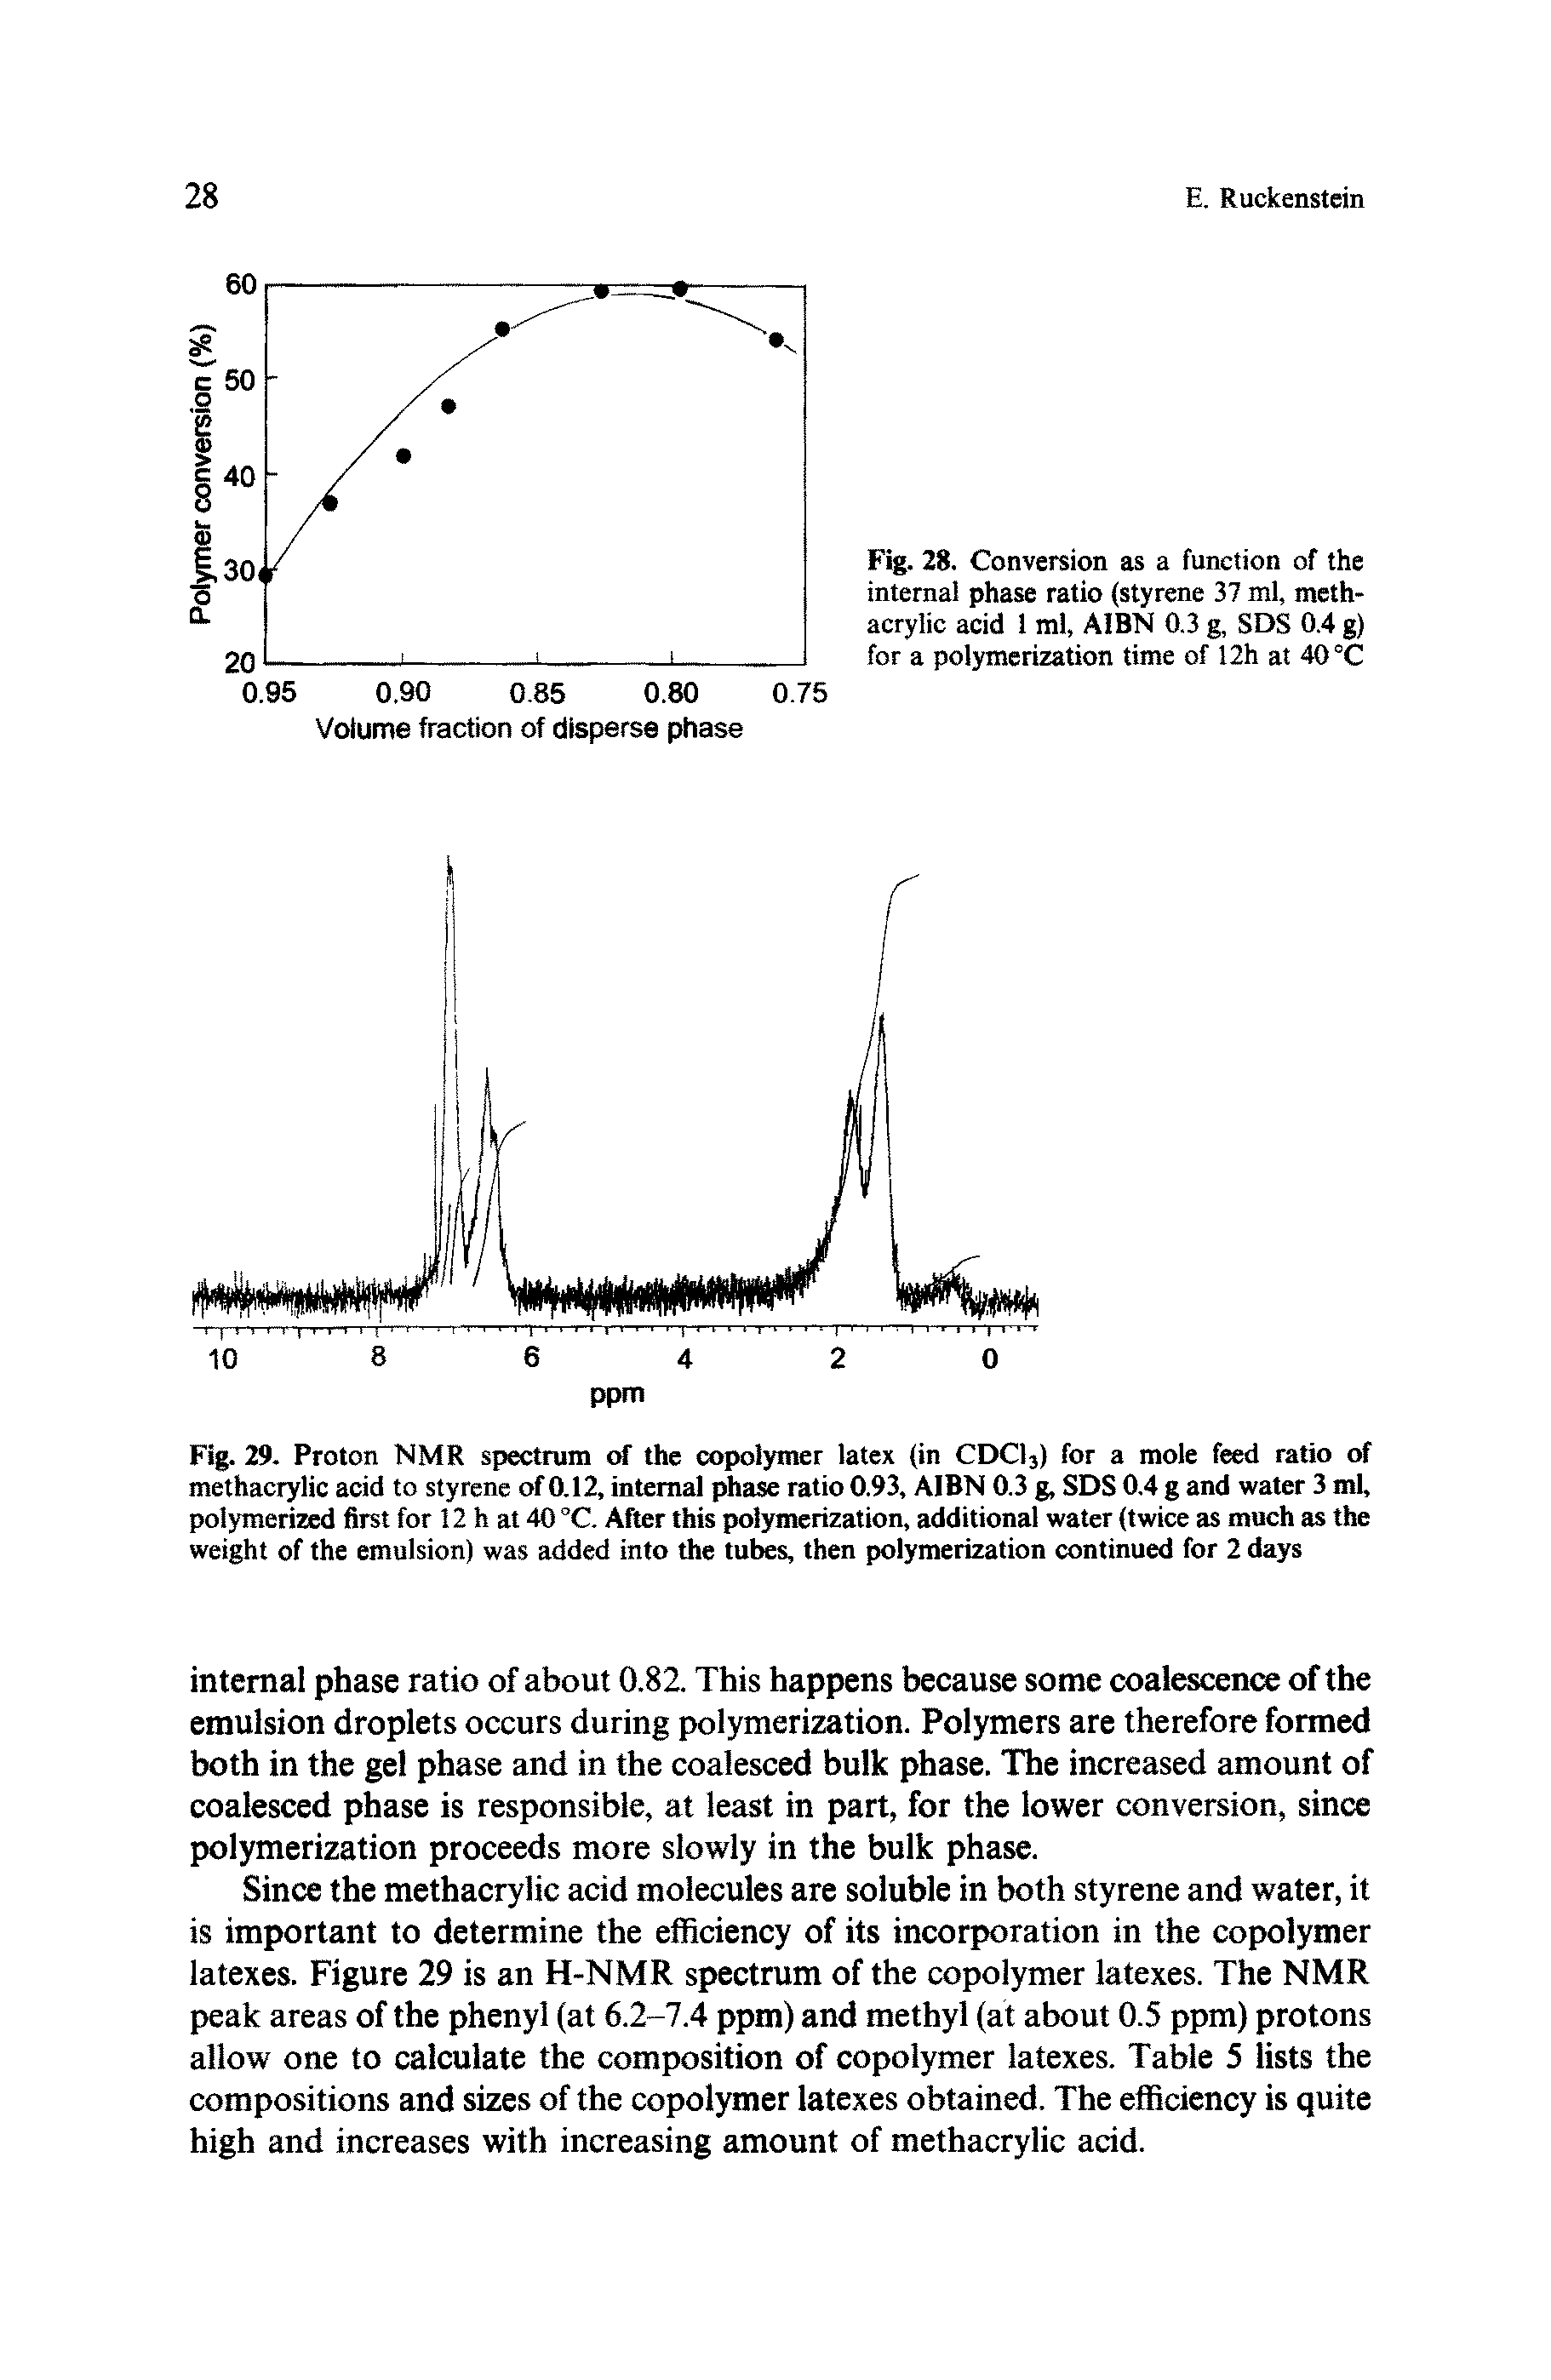 Fig. 29. Proton NMR spectrum of the copolymer latex (in CDC13) for a mole feed ratio of methacrylic acid to styrene of 0.12, internal phase ratio 0.93, AIBN 0.3 g, SDS 0.4 g and water 3 ml, polymerized first for 12 h at 40 °C. After this polymerization, additional water (twice as much as the weight of the emulsion) was added into the tubes, then polymerization continued for 2 days...